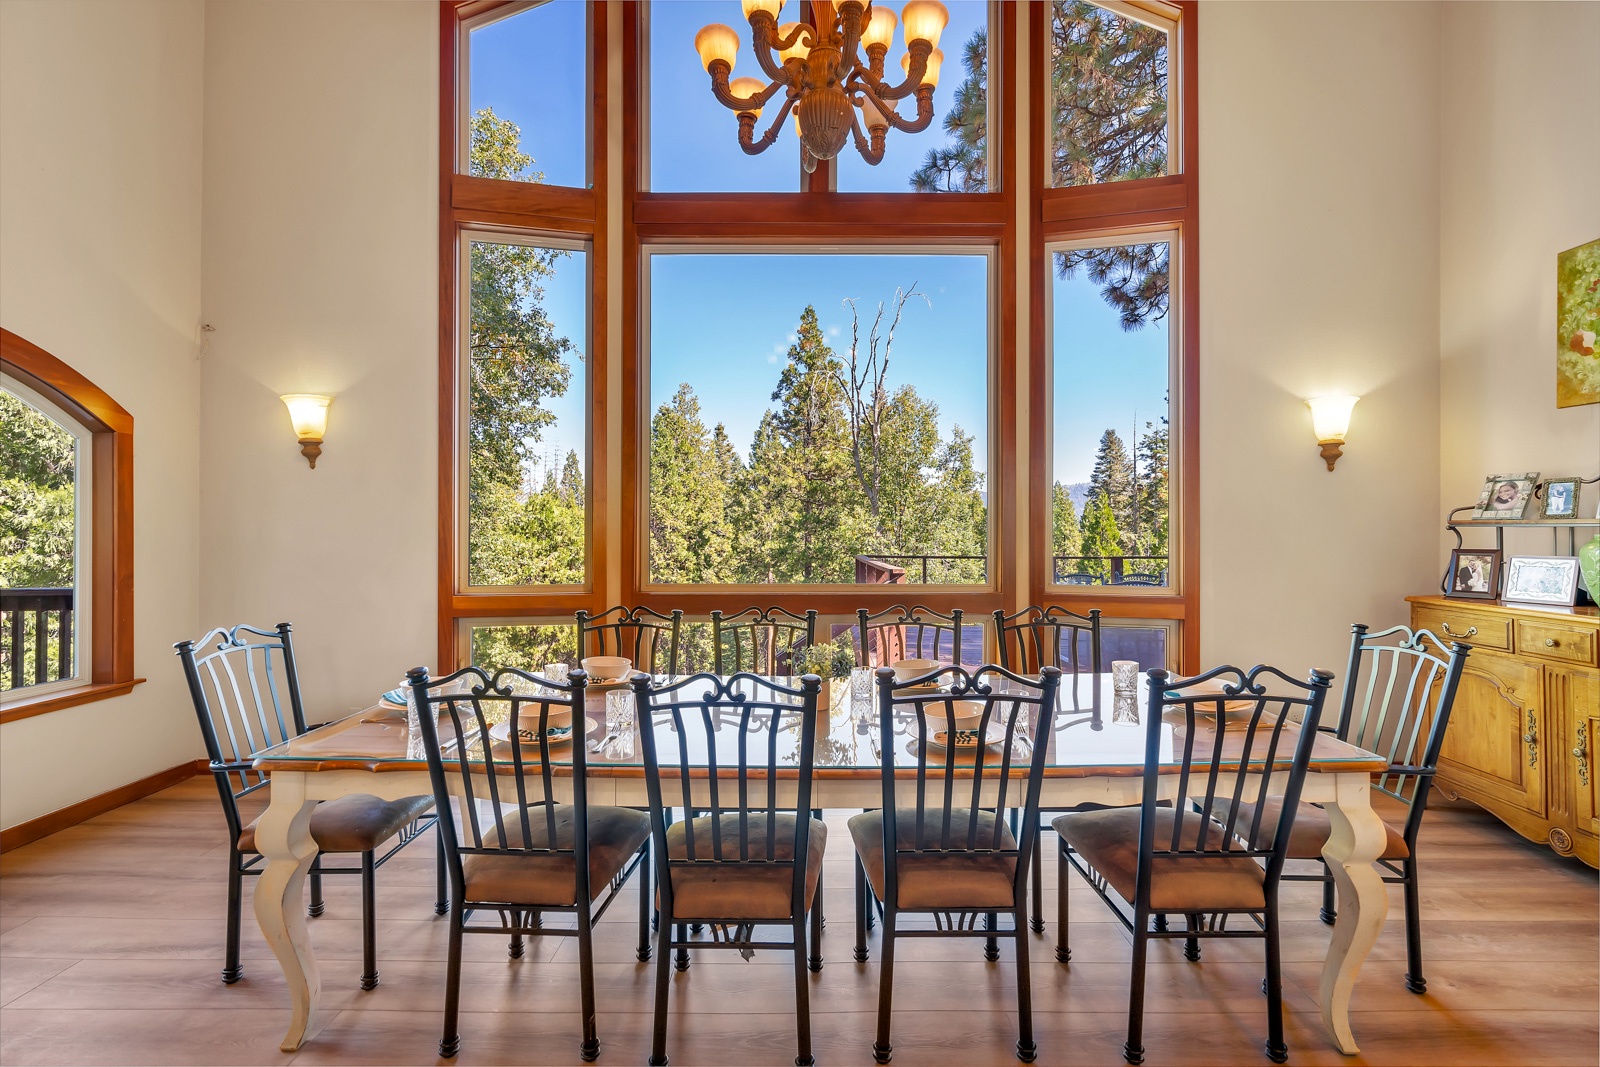 Gather for meals together with a view at the dining table, with seating for 10